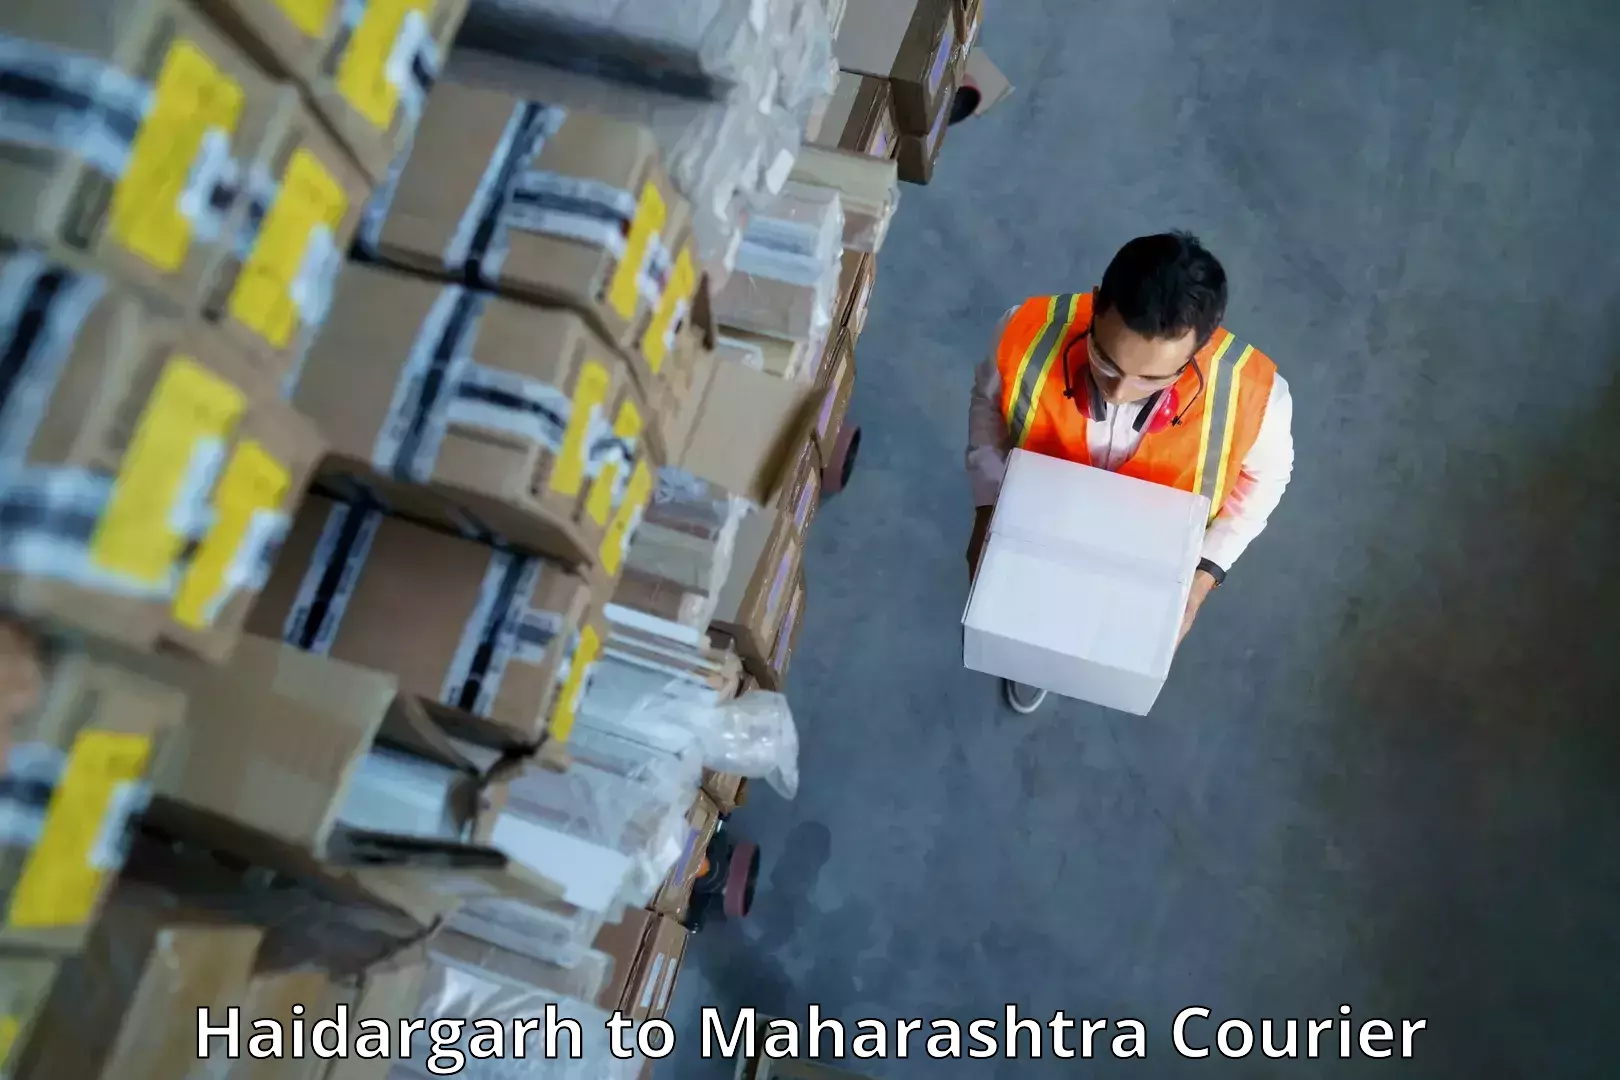 Nationwide courier service Haidargarh to Ambegaon